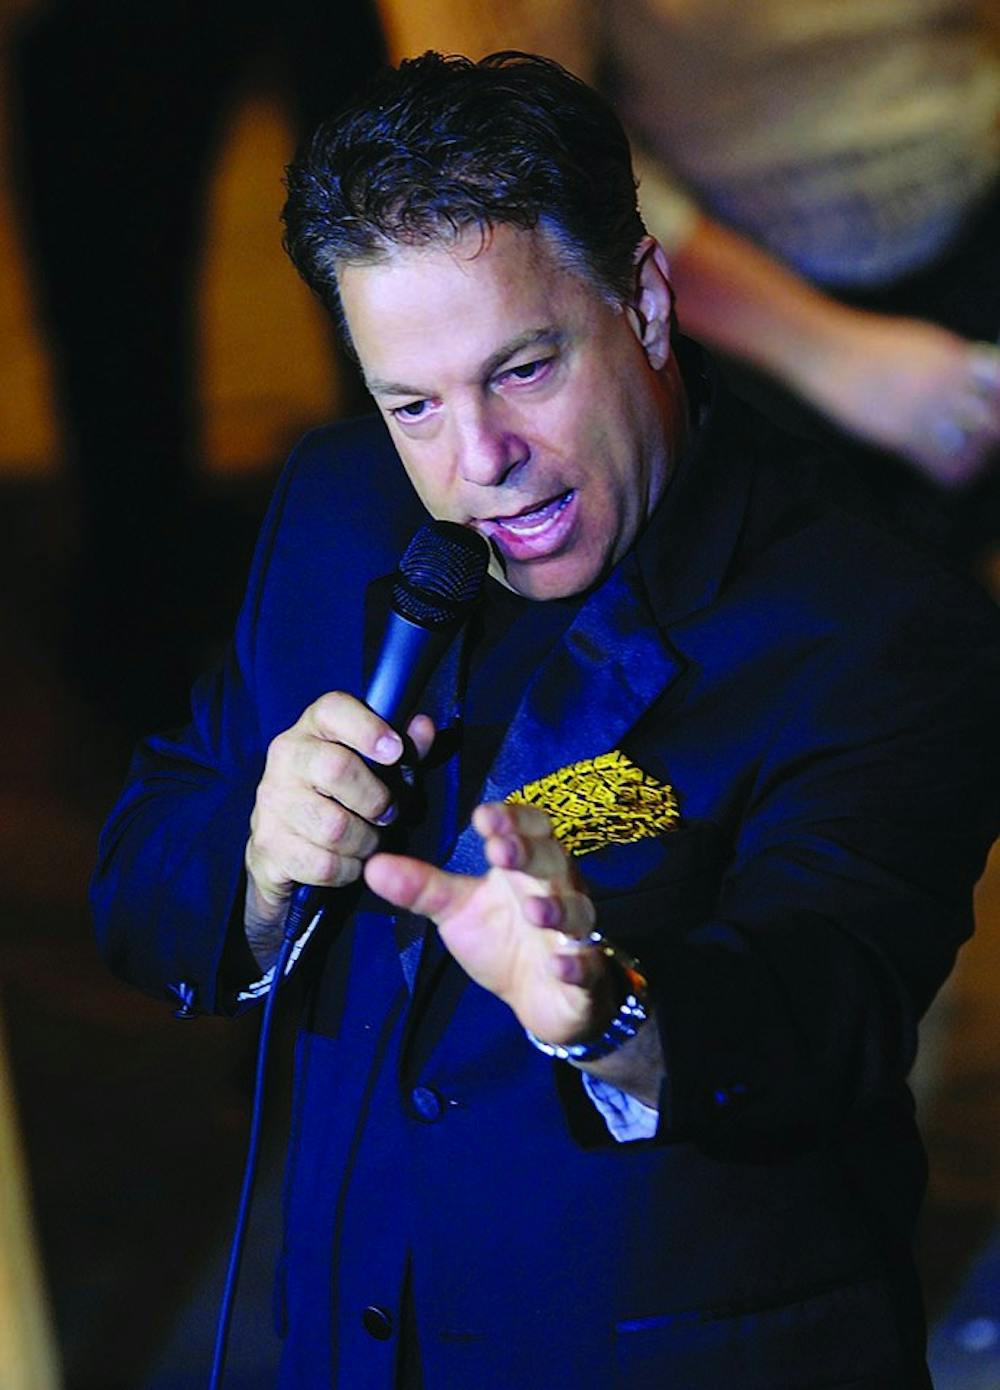 Steve Lippia sings during a concert. Lippia will be performing tonight in Sursa hall for the "Art of Jazz Series: A Las Vegas Show Tribute to Frank Sinatra". PHOTO PROVIDED BY 